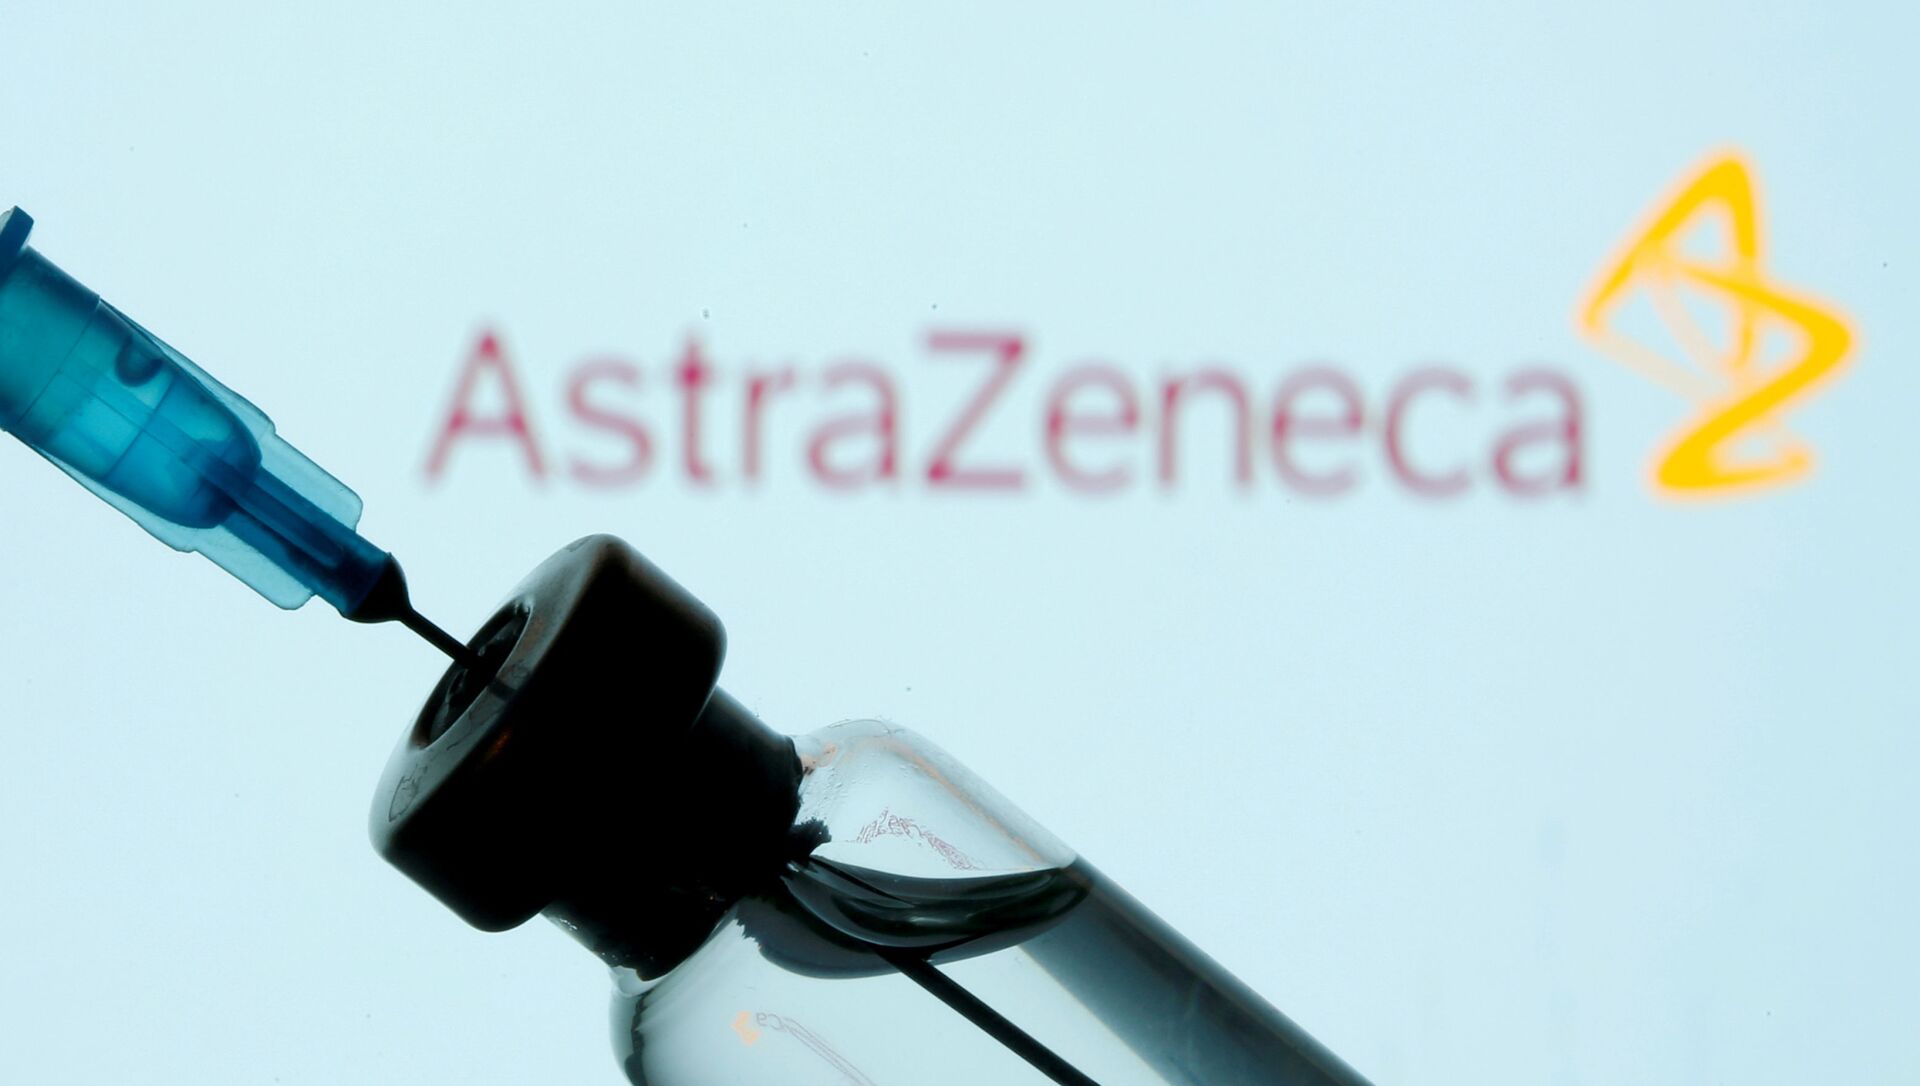 FILE PHOTO: A vial and syringe are seen in front of a displayed AstraZeneca logo in this illustration taken January 11, 2021 - Sputnik International, 1920, 11.02.2021